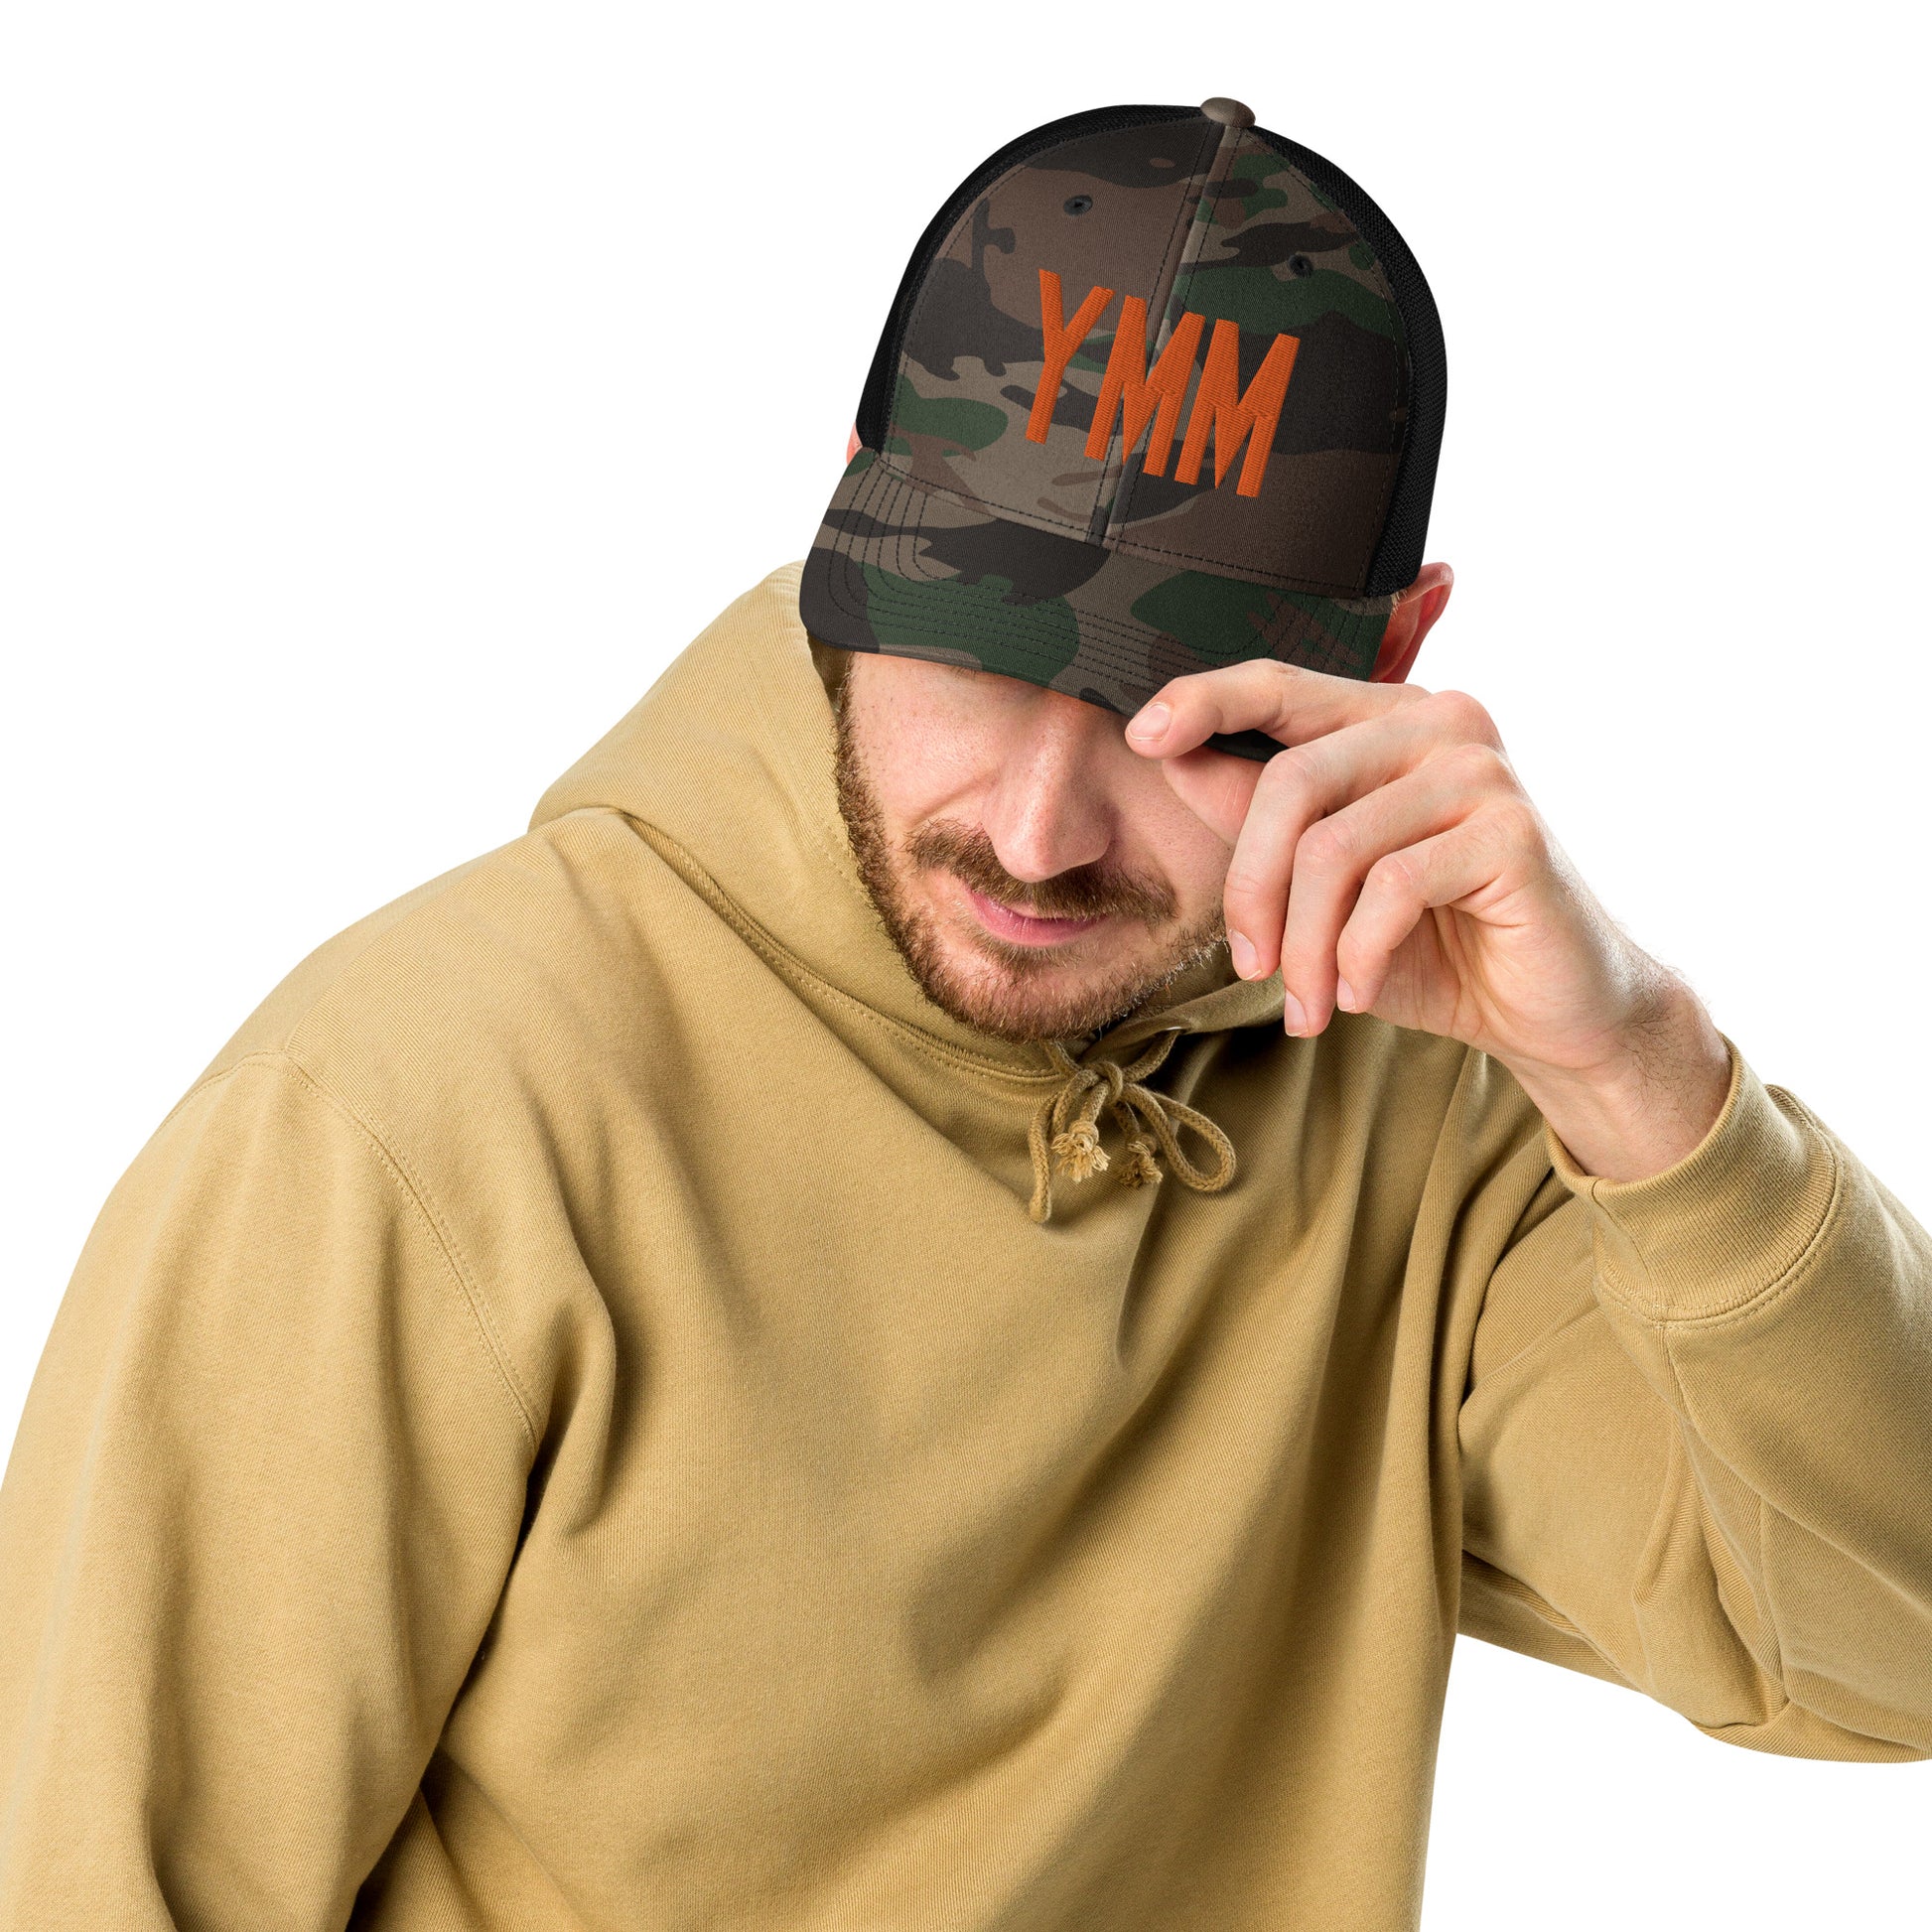 Airport Code Camouflage Trucker Hat - Orange • YMM Fort McMurray • YHM Designs - Image 05